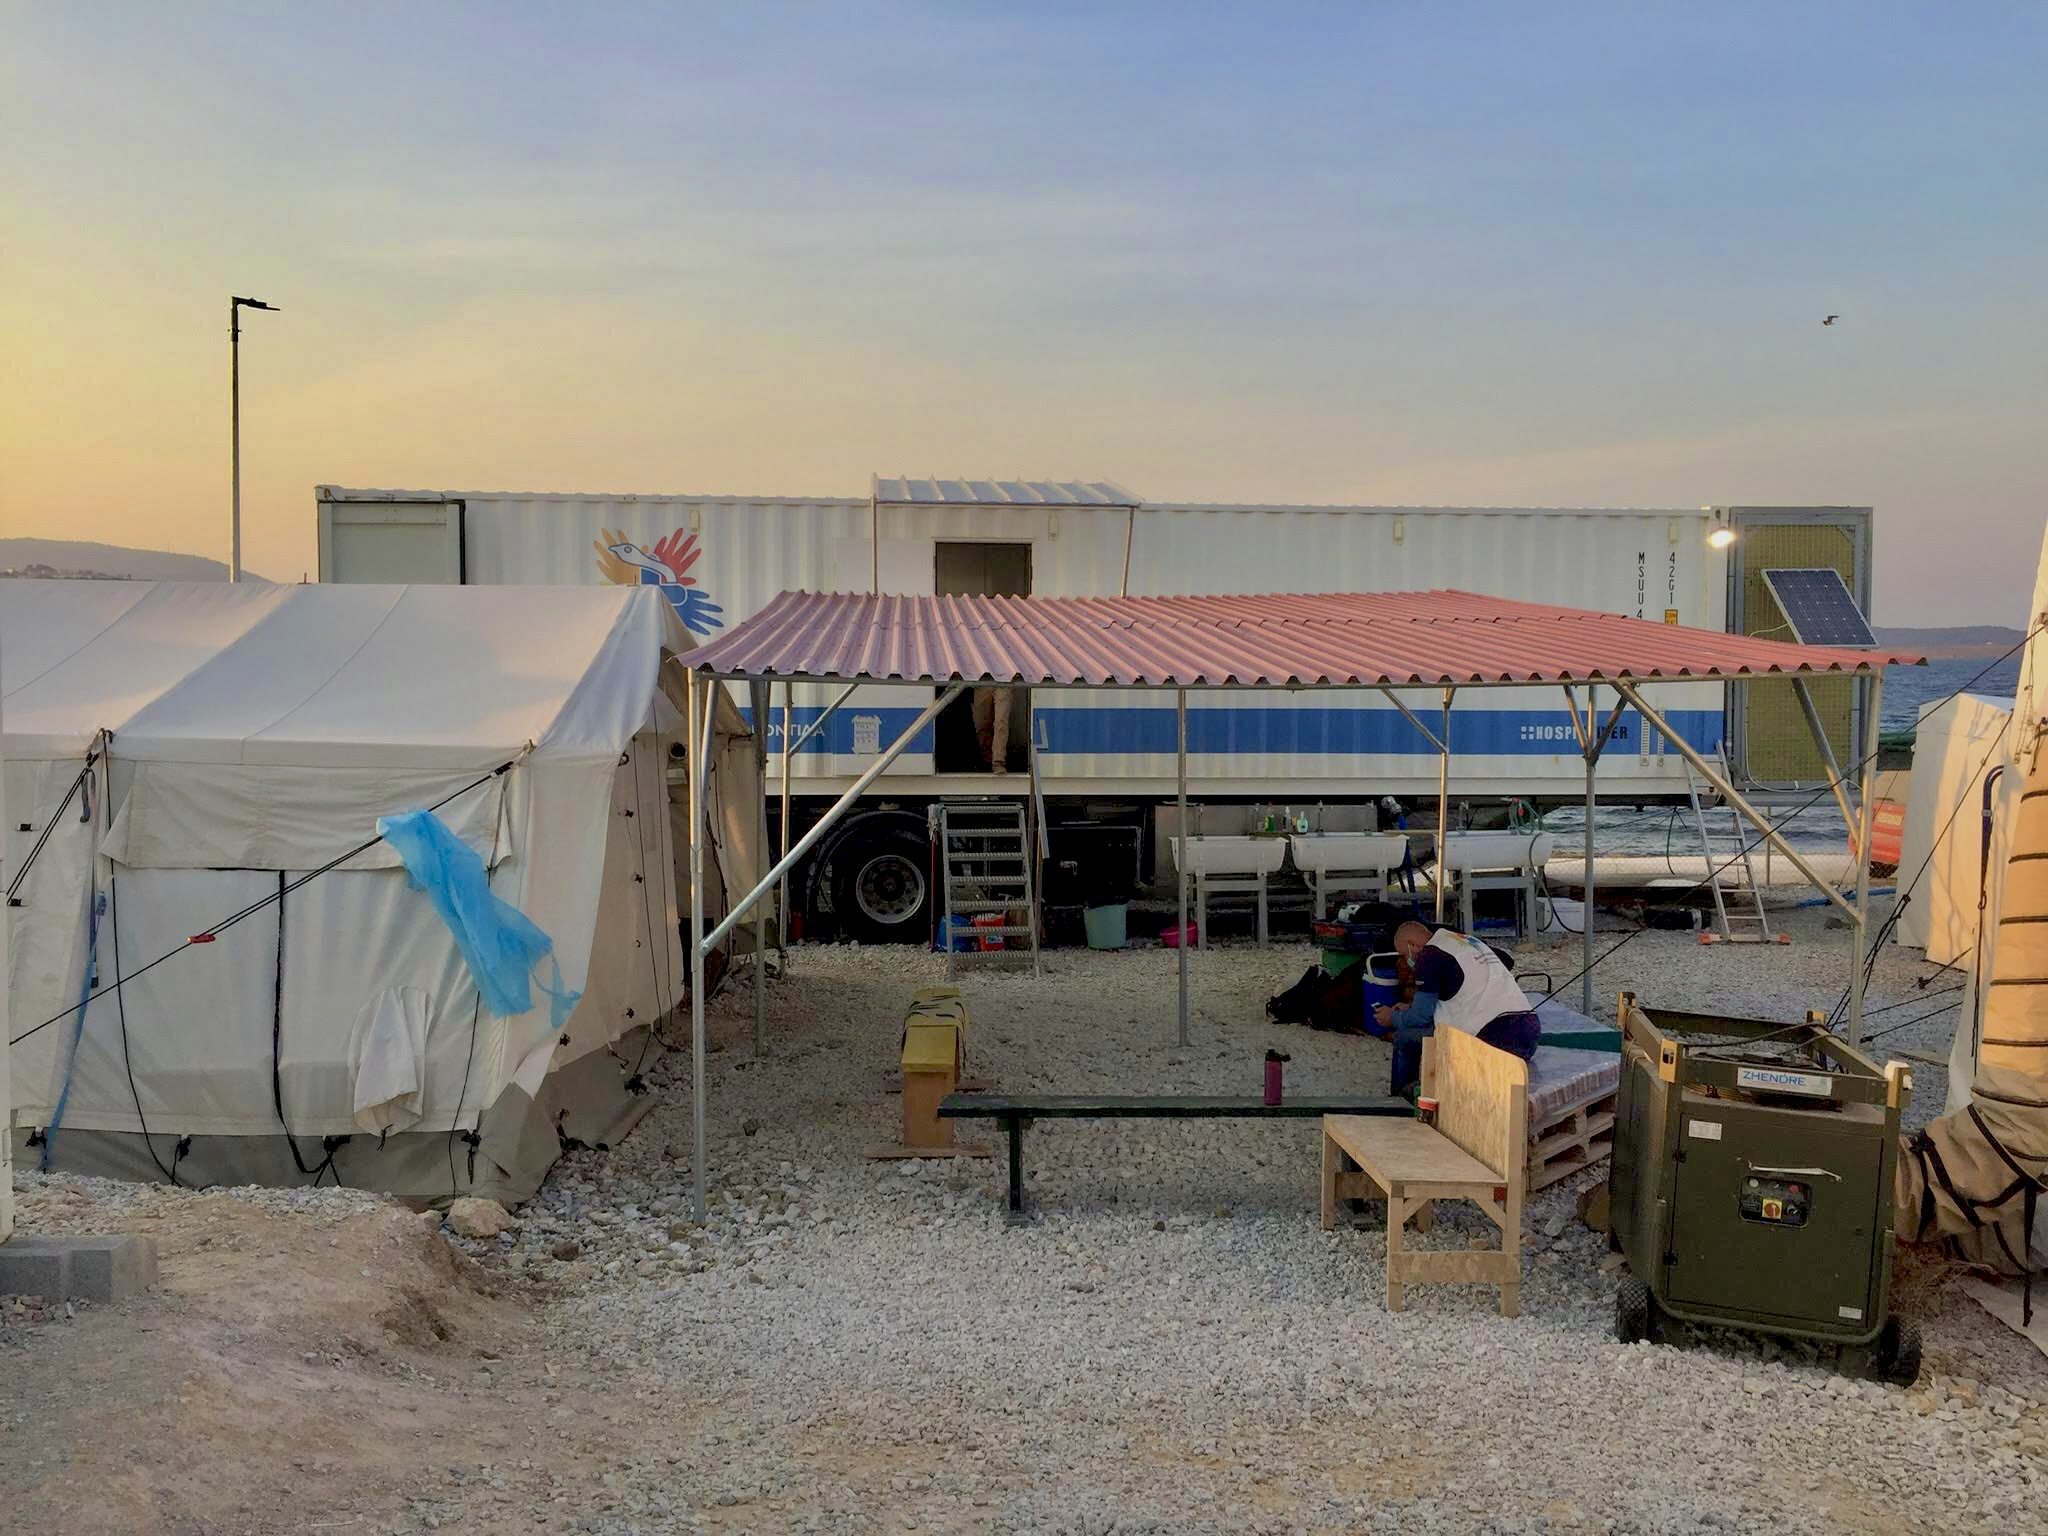 Sunset at a refugee camp in Lesvos, Greece